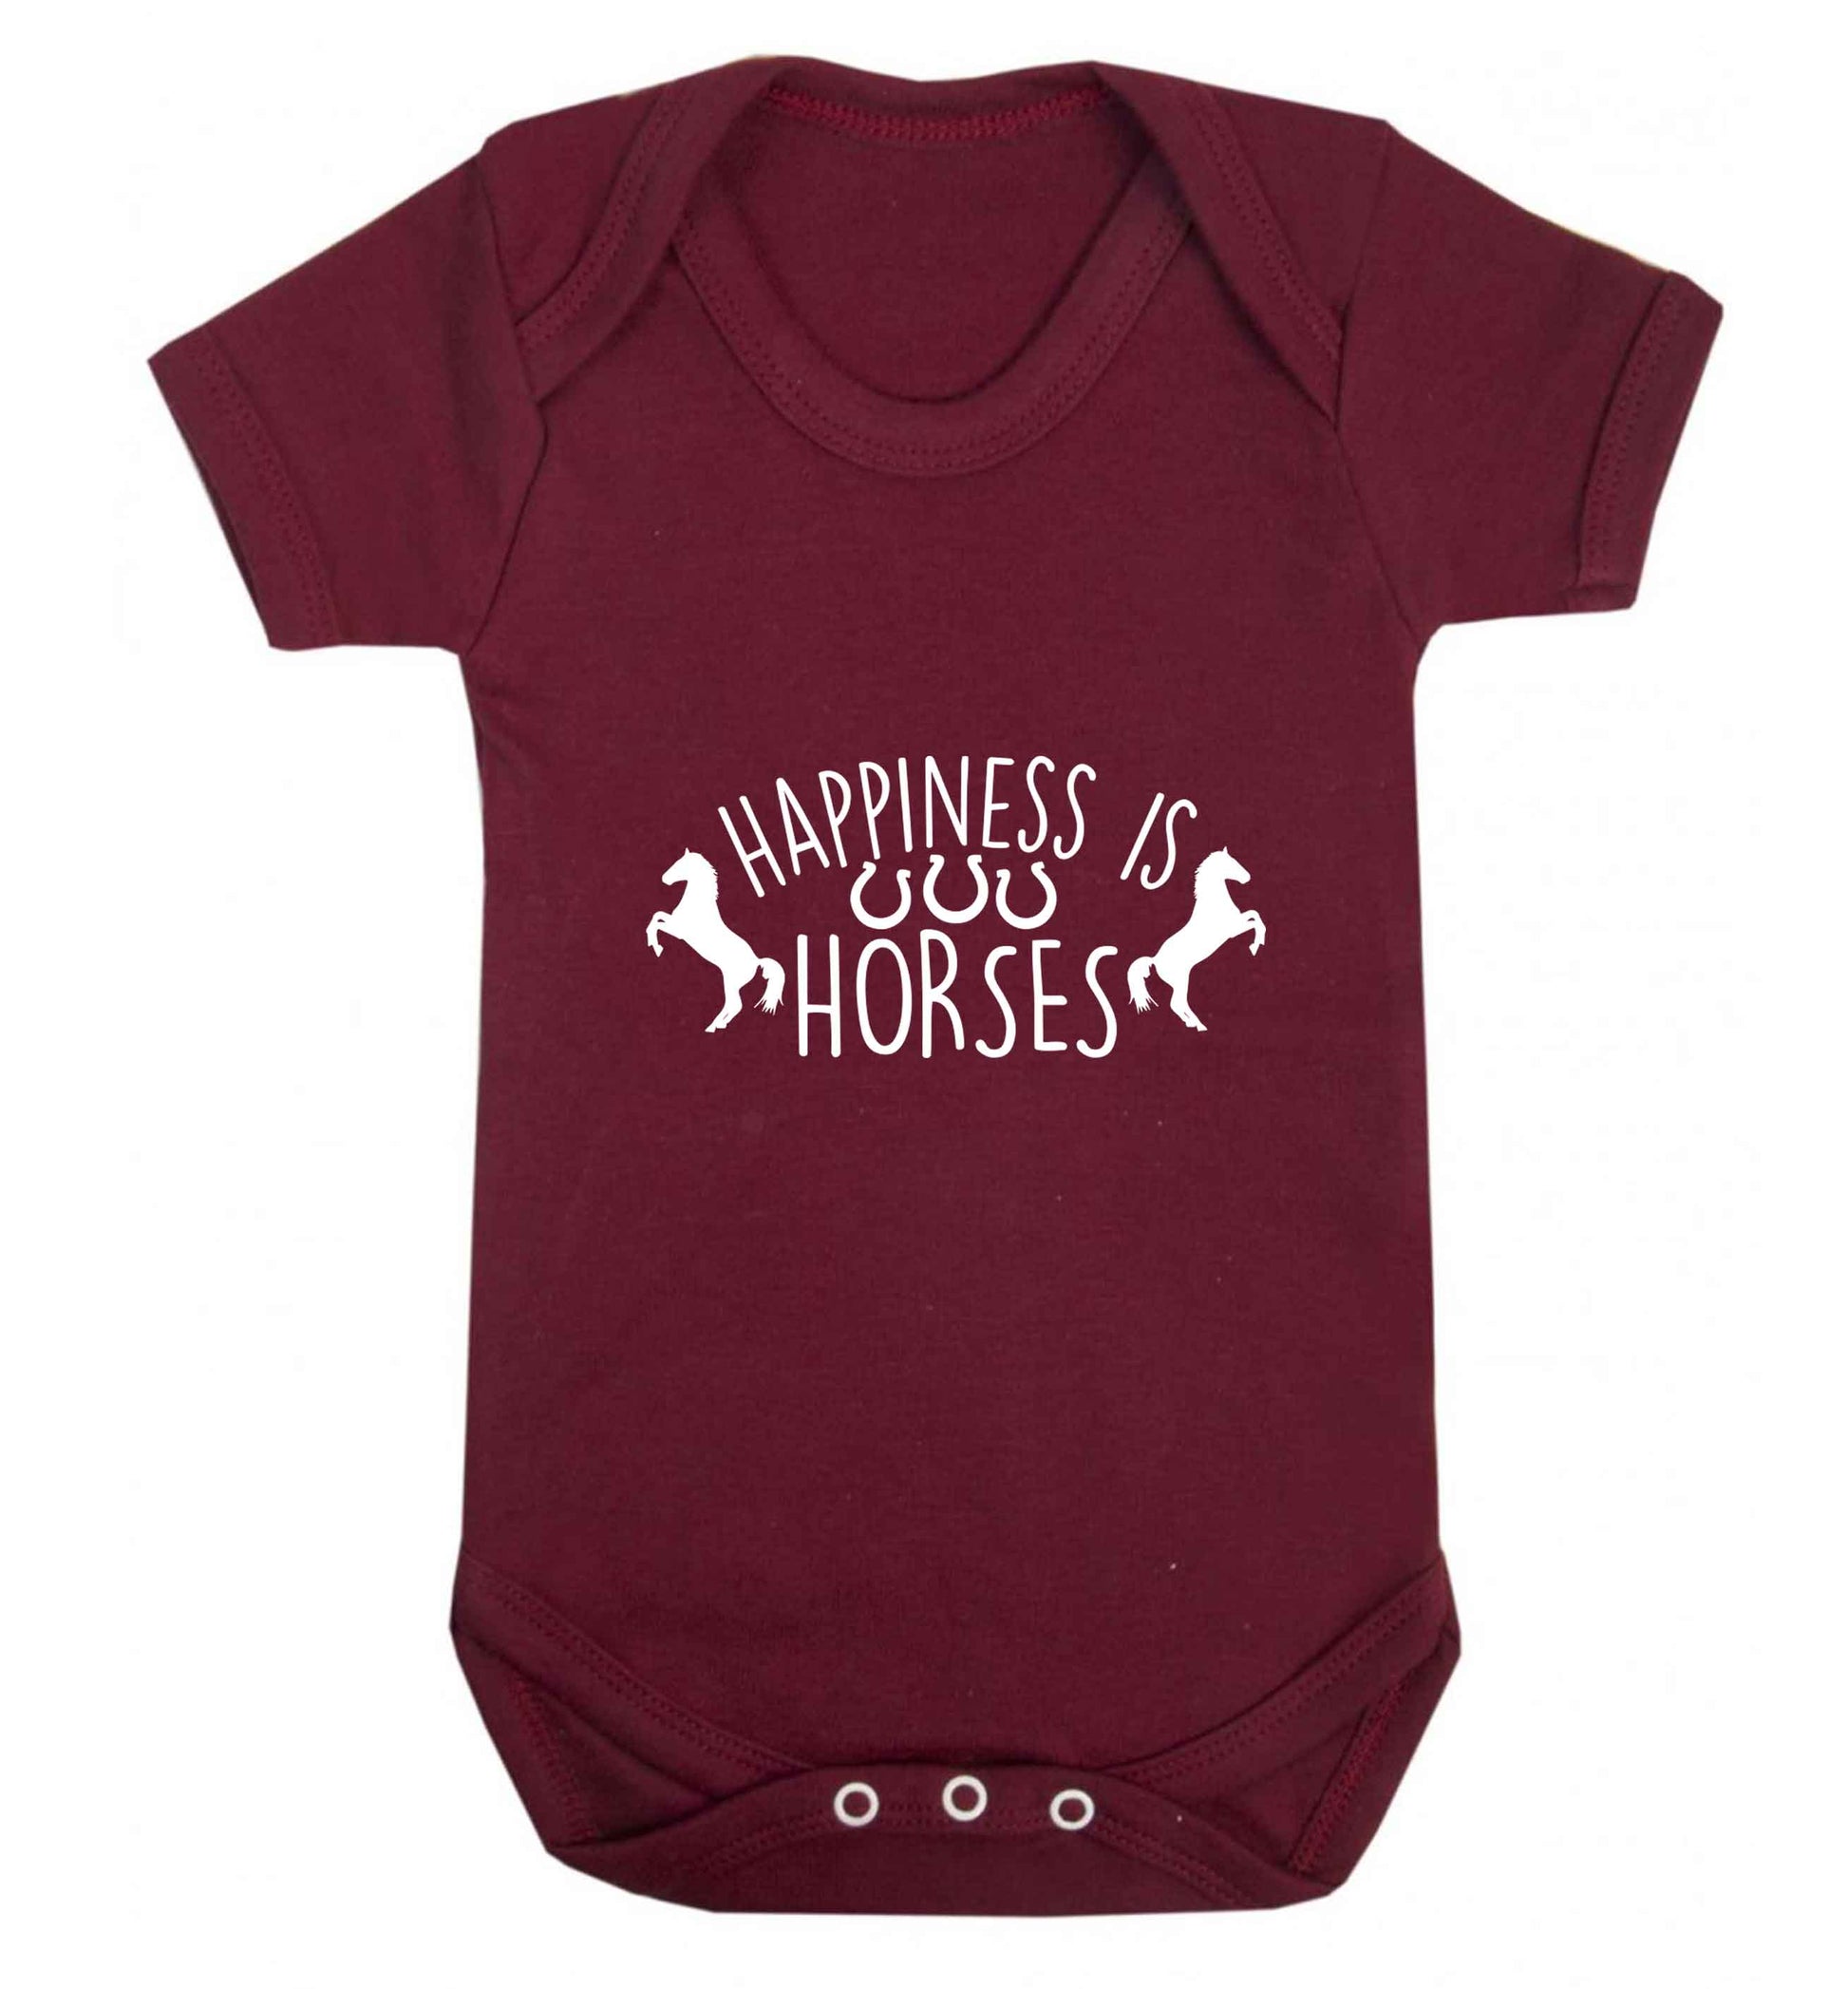 Happiness is horses baby vest maroon 18-24 months